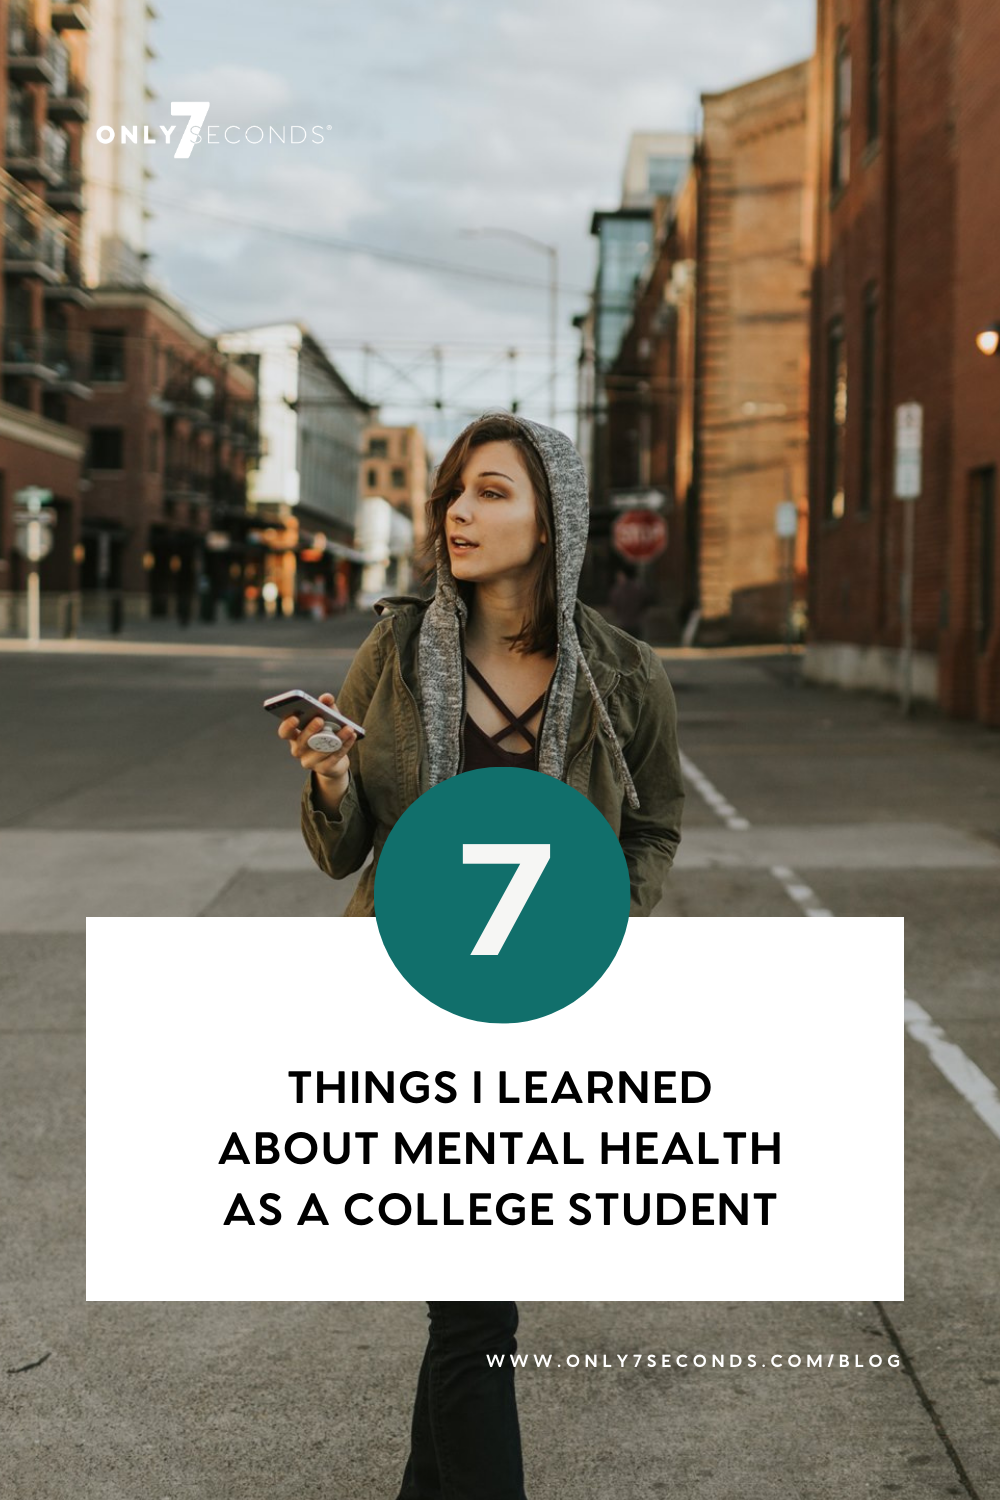 7 Things I Learned About Mental Health As a College Student